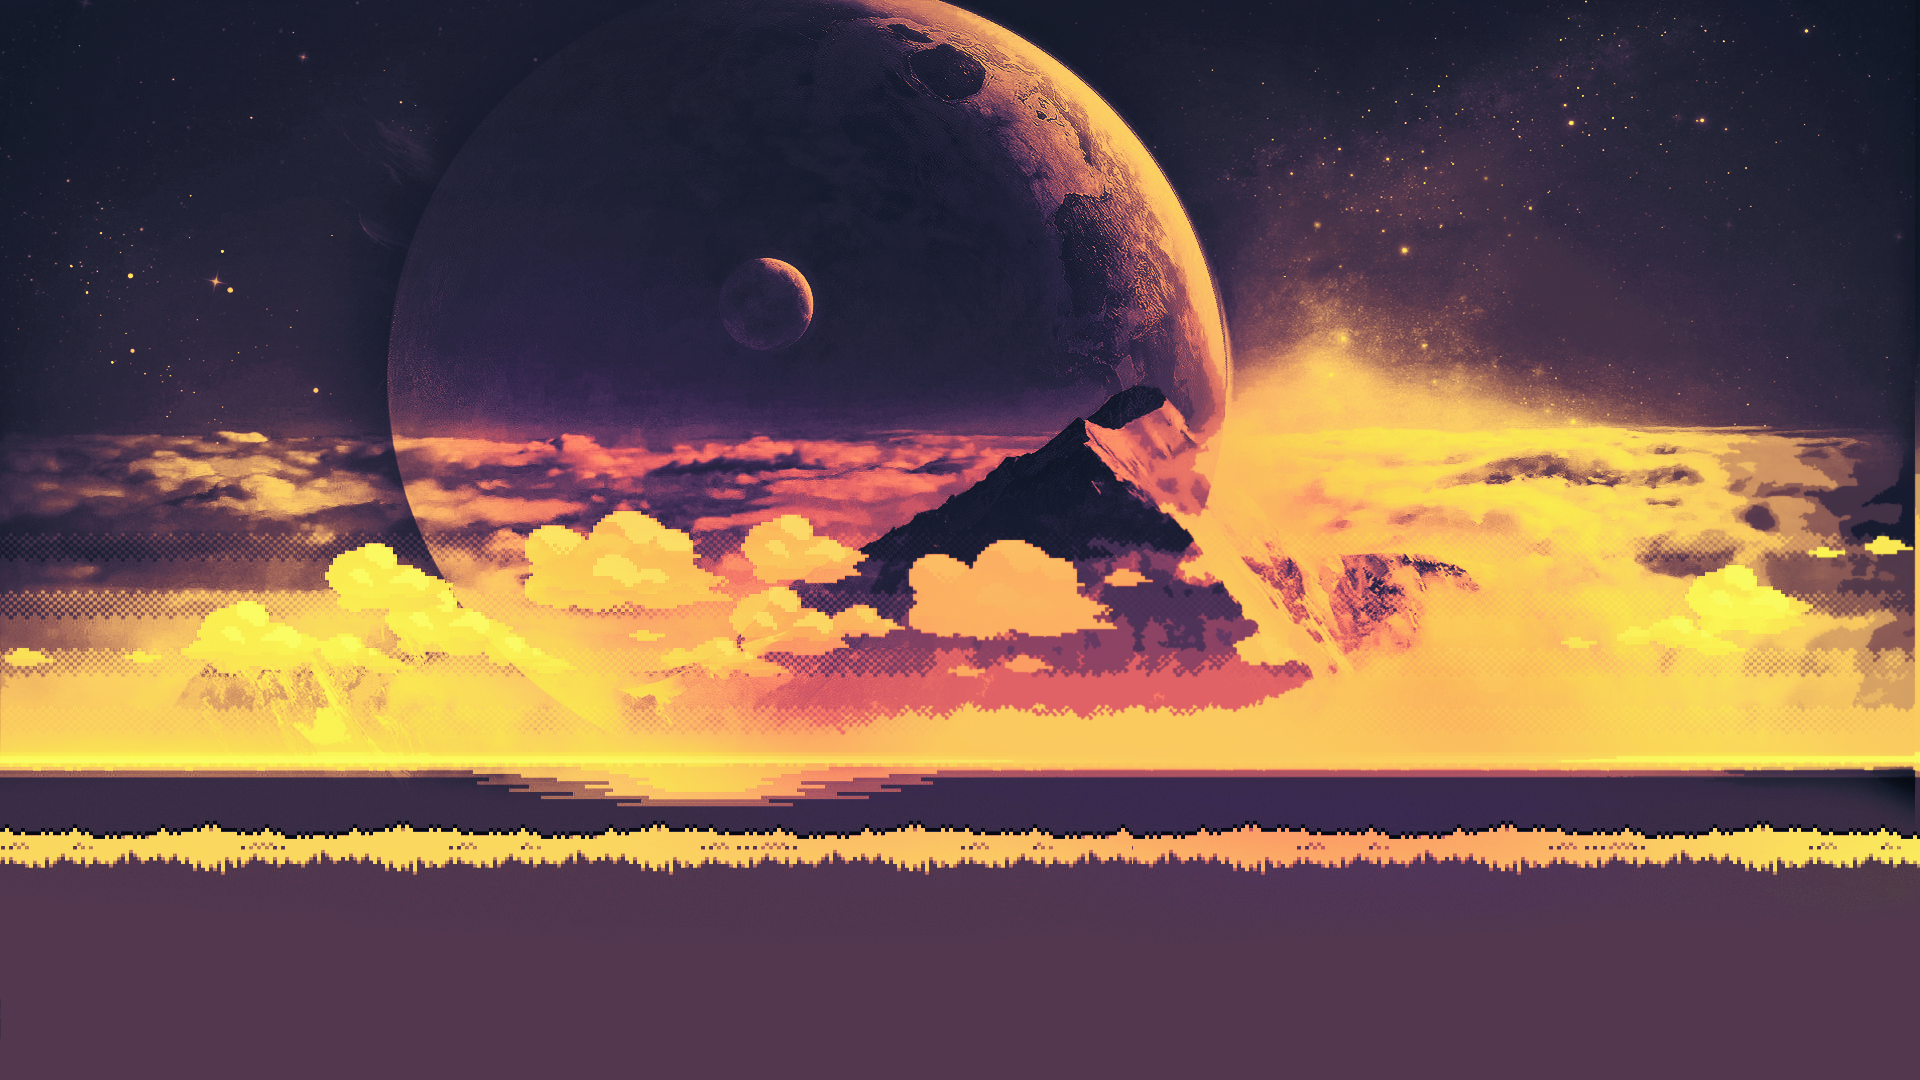 General 1920x1080 space Moon stars pixels planet clouds